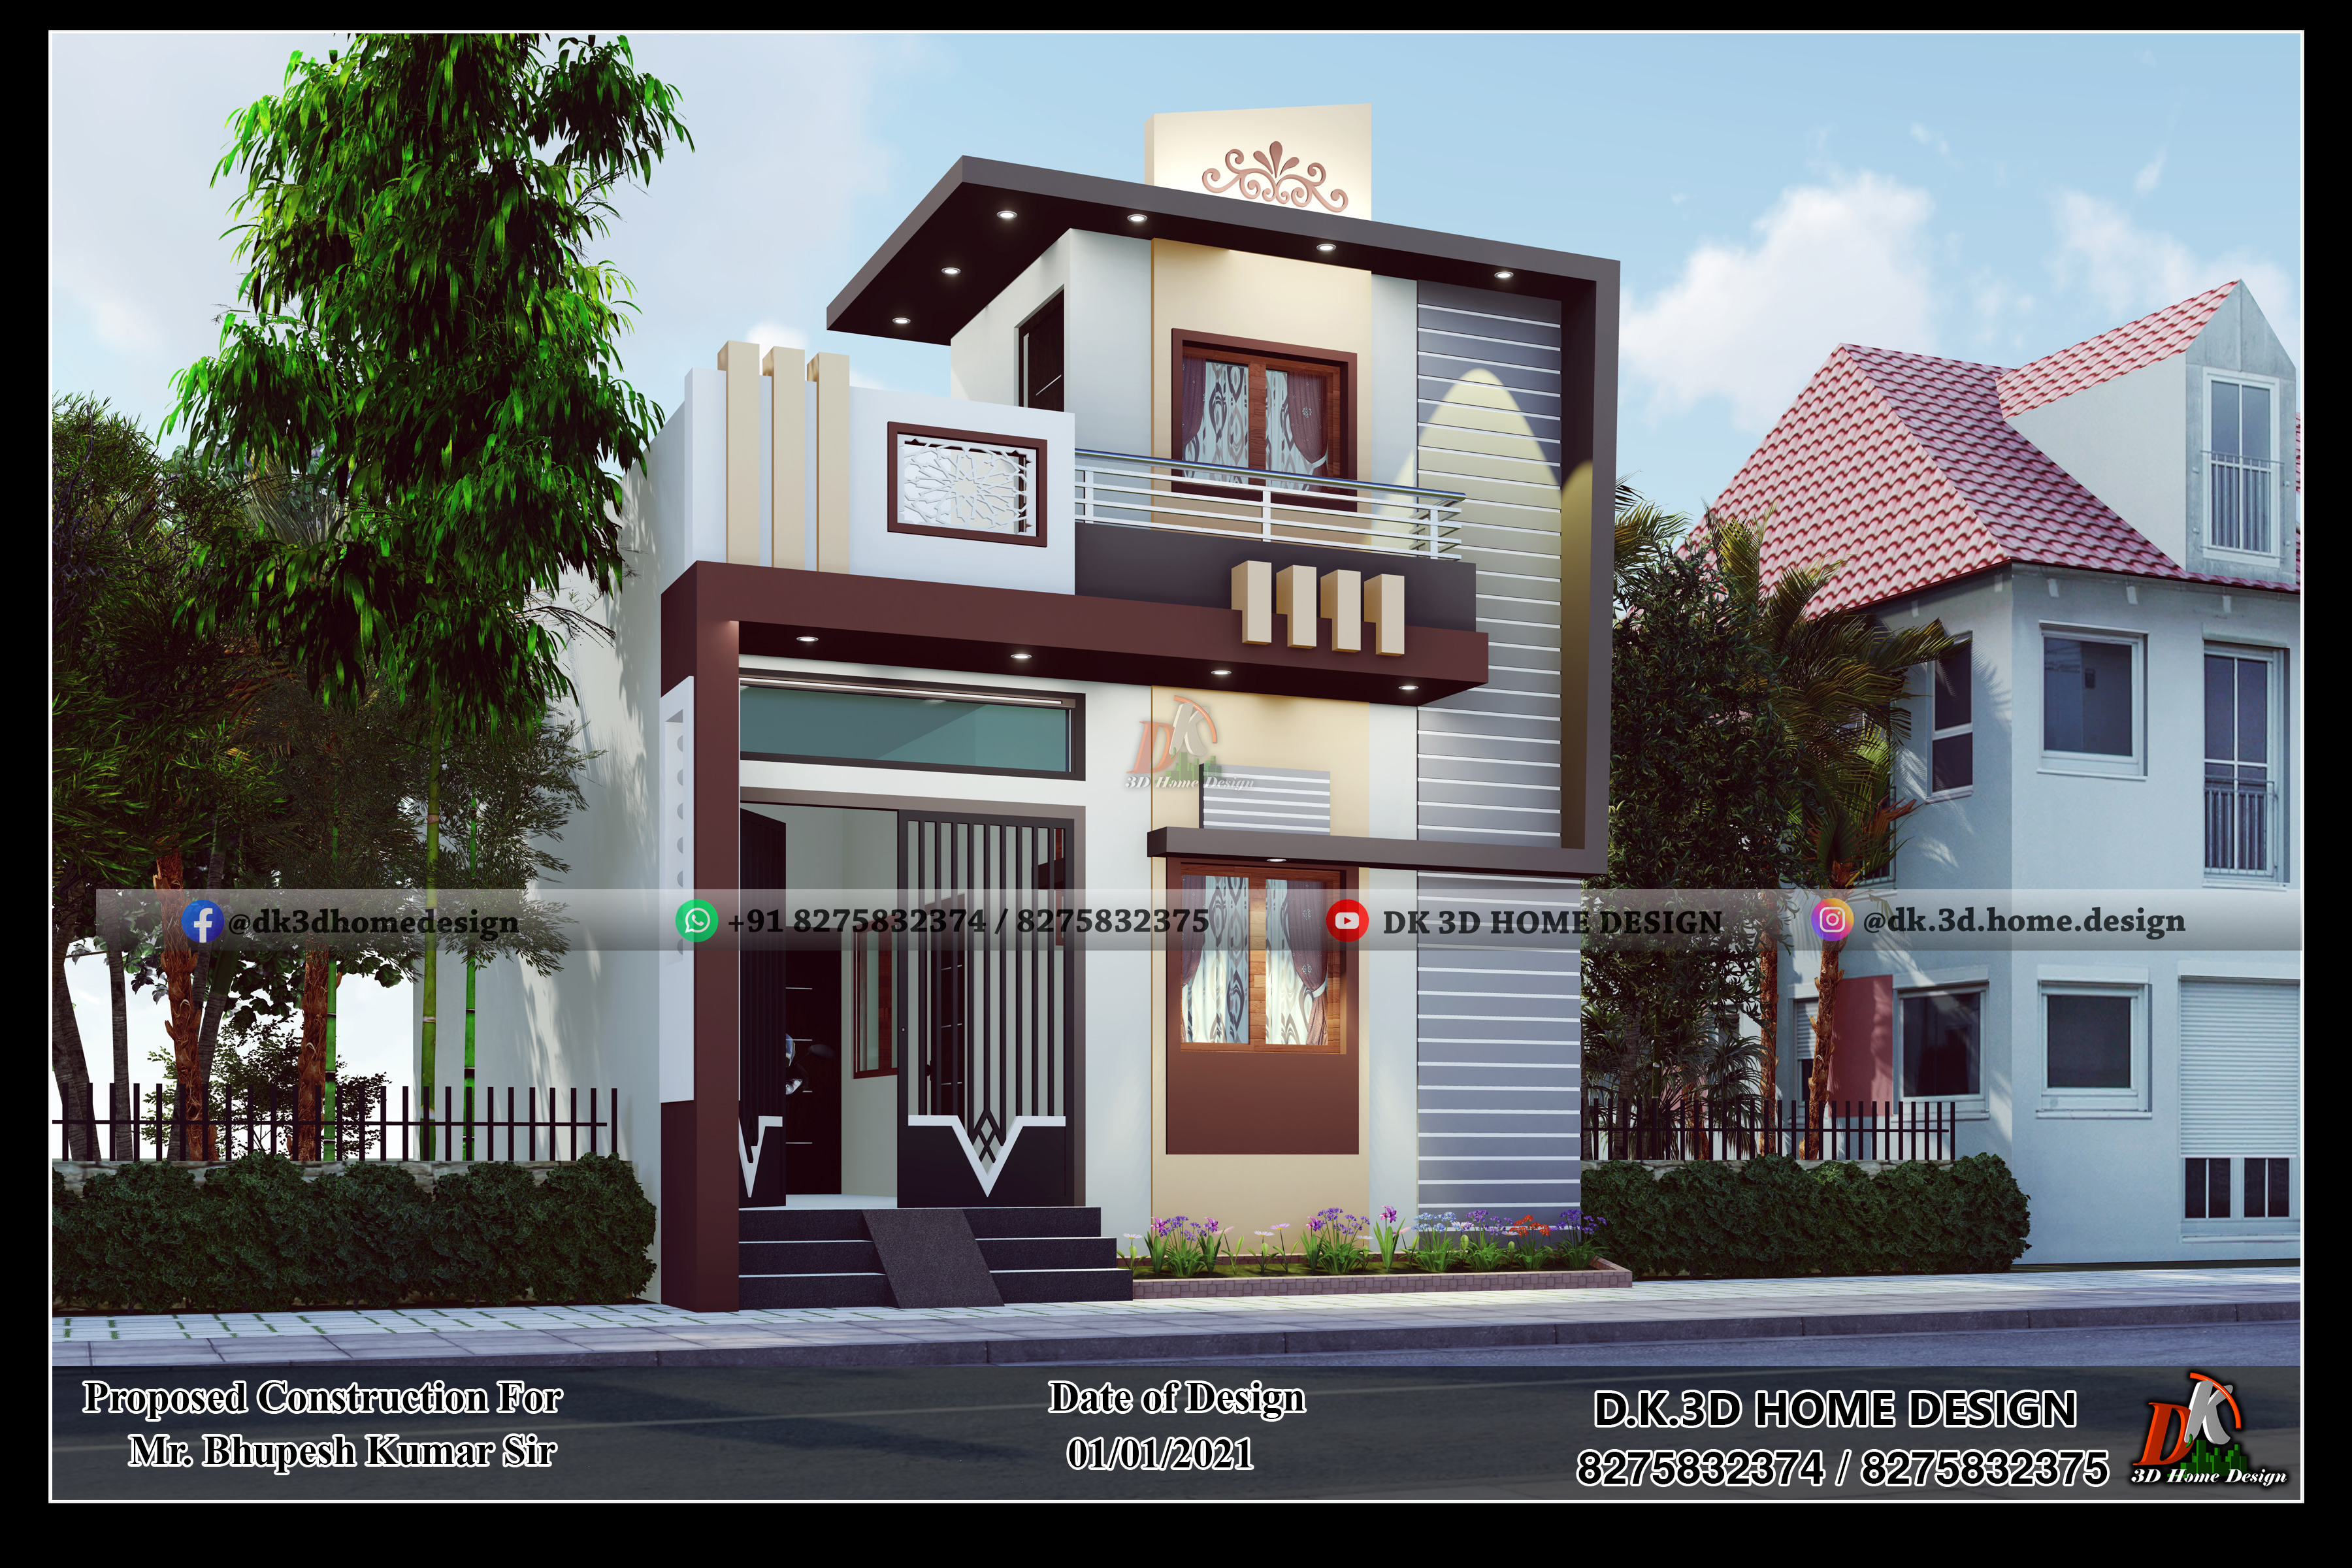 800 sq ft house design indian style